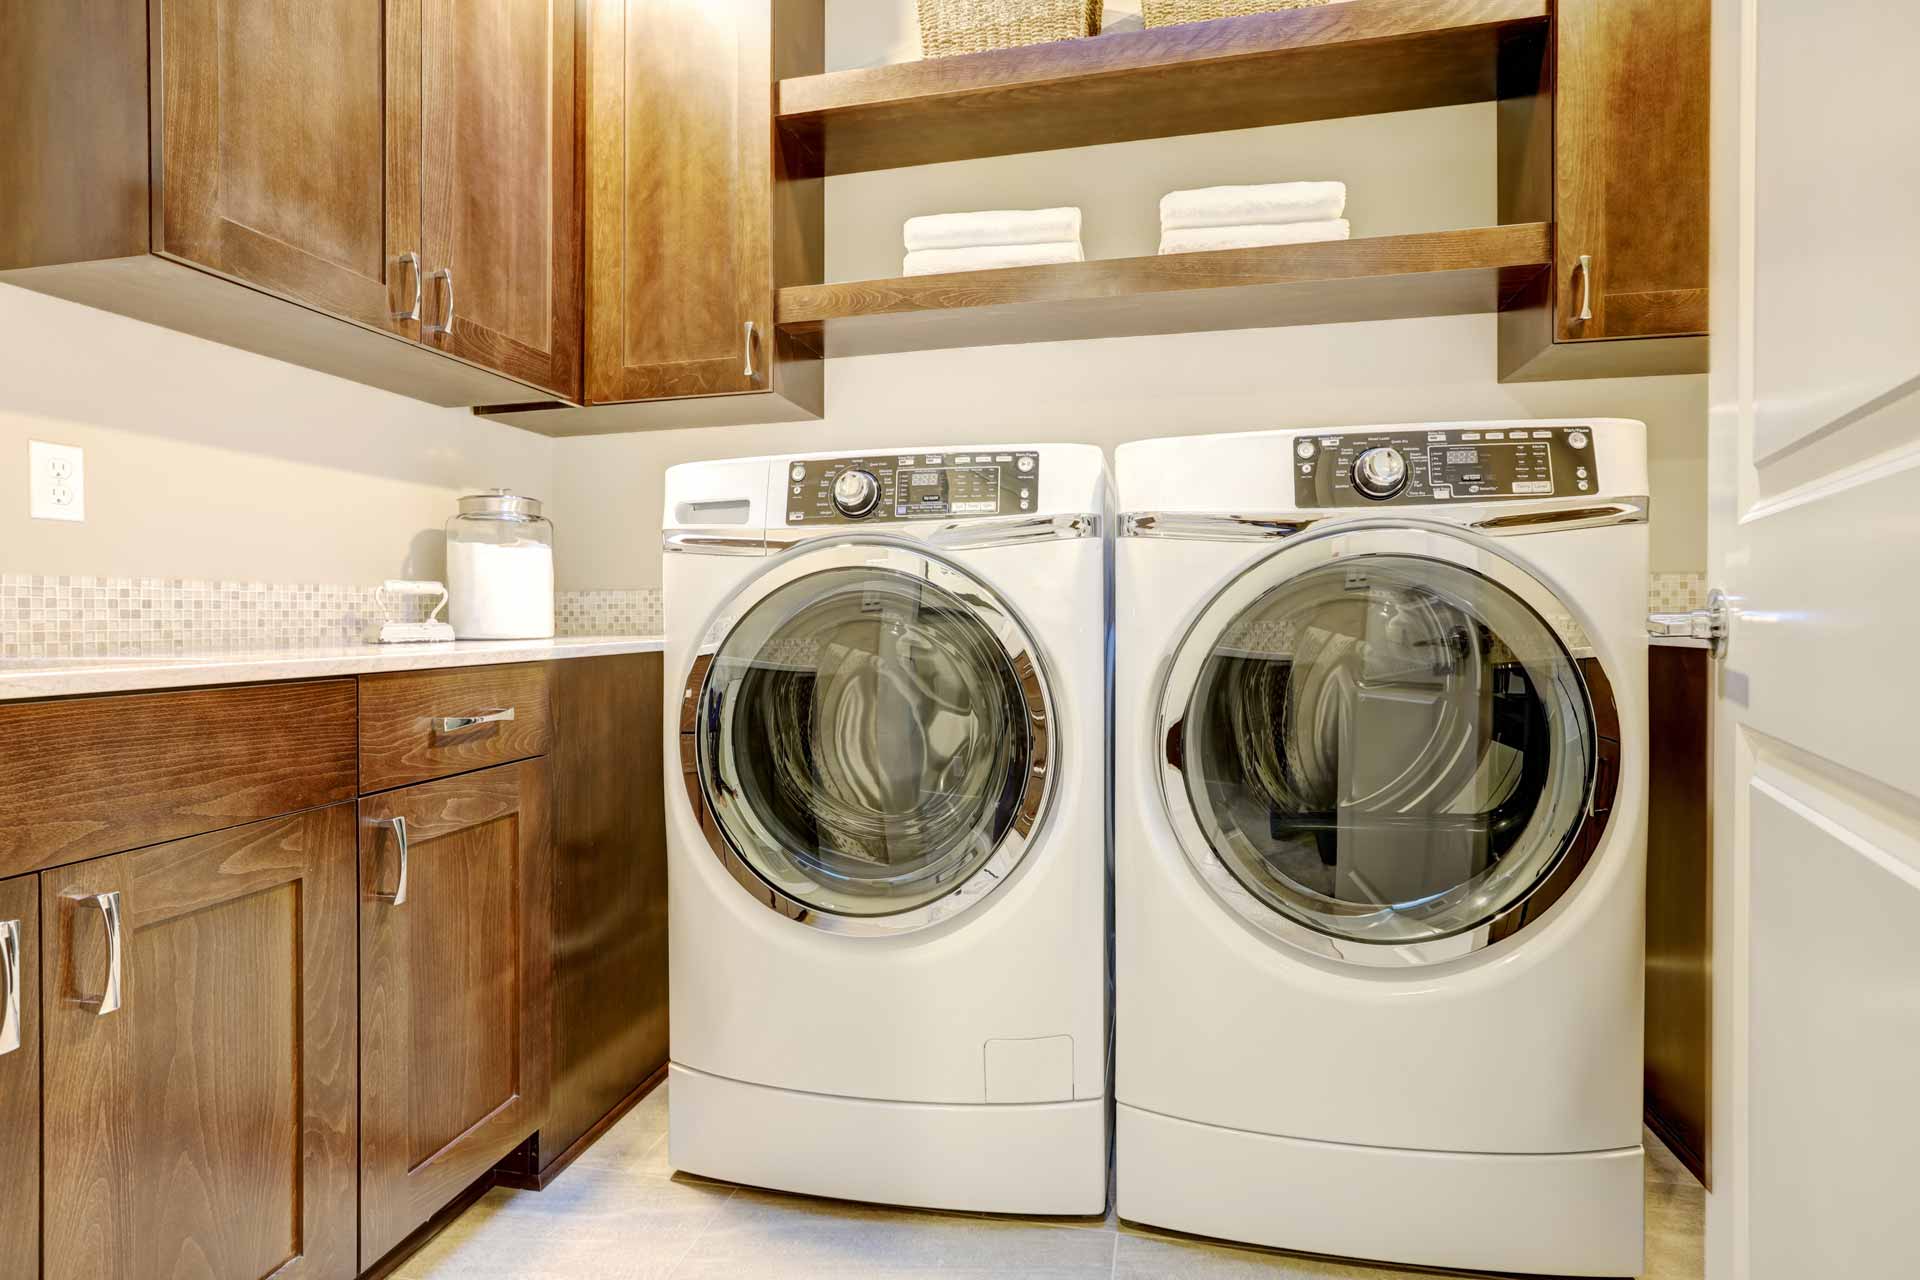 Washer and dryer in a clean laundry room